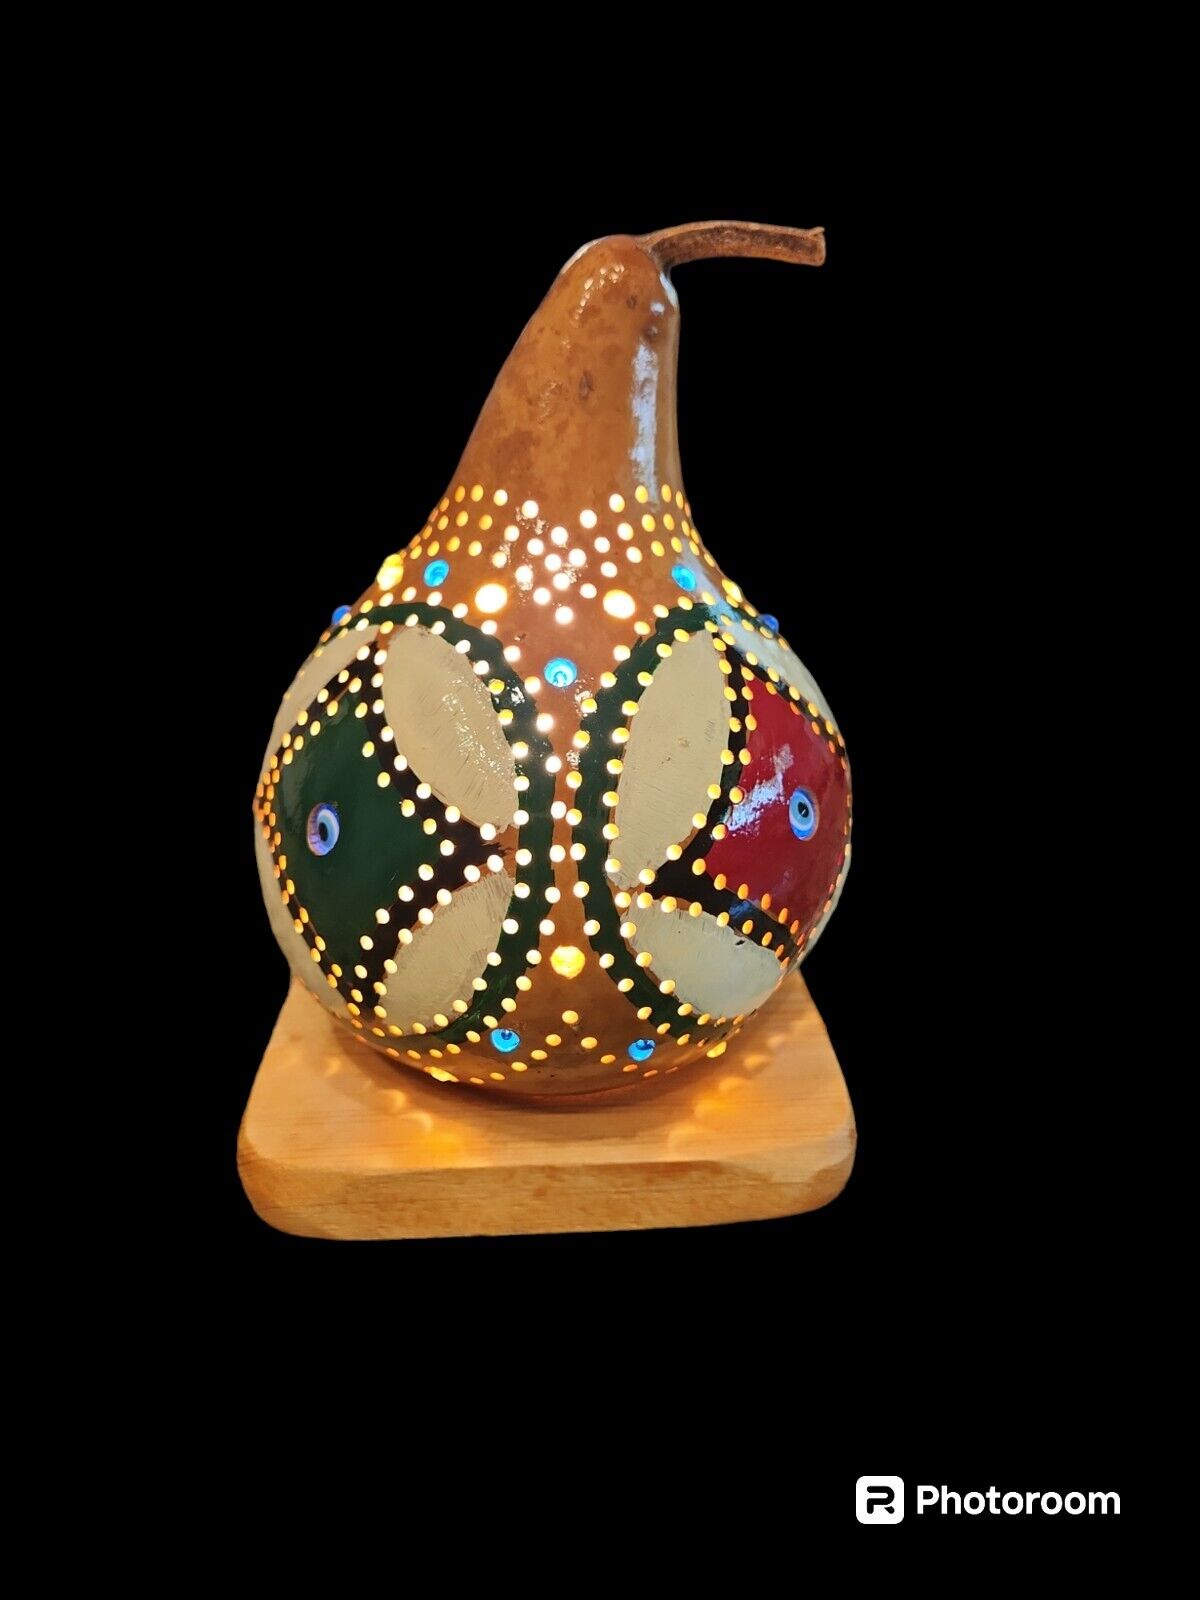 Vintage Boho Calabash Table Lamp Gourd Hand Painted With Evil Eye And Beads.